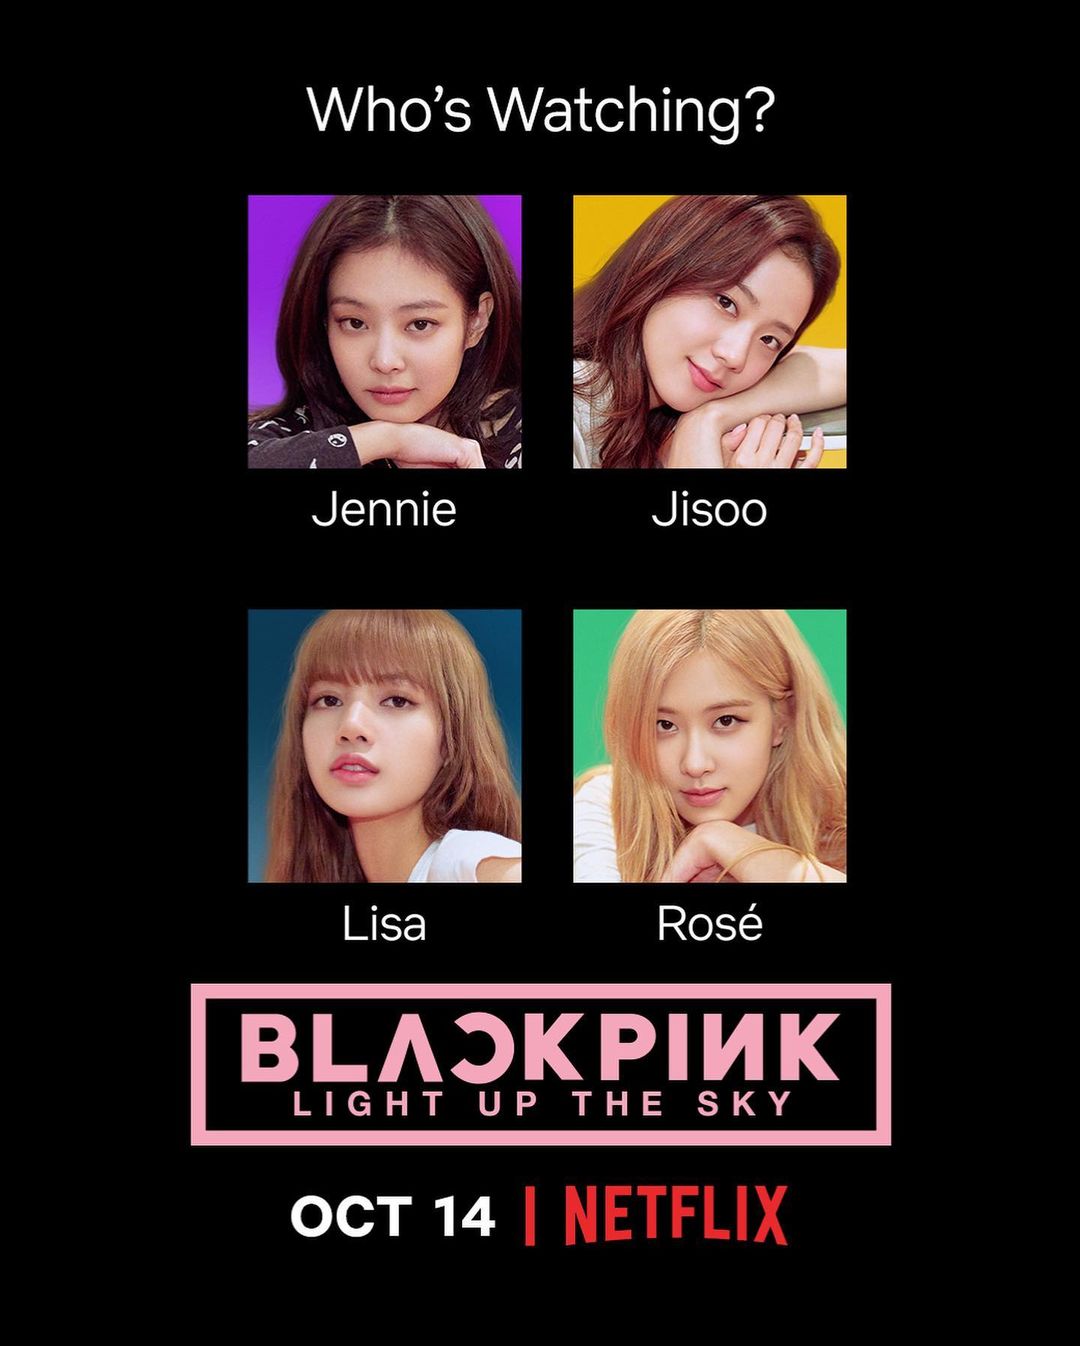 BLACKPINK: Light Up the Sky and BLACKPINK profile icons launch globally on @Netf…